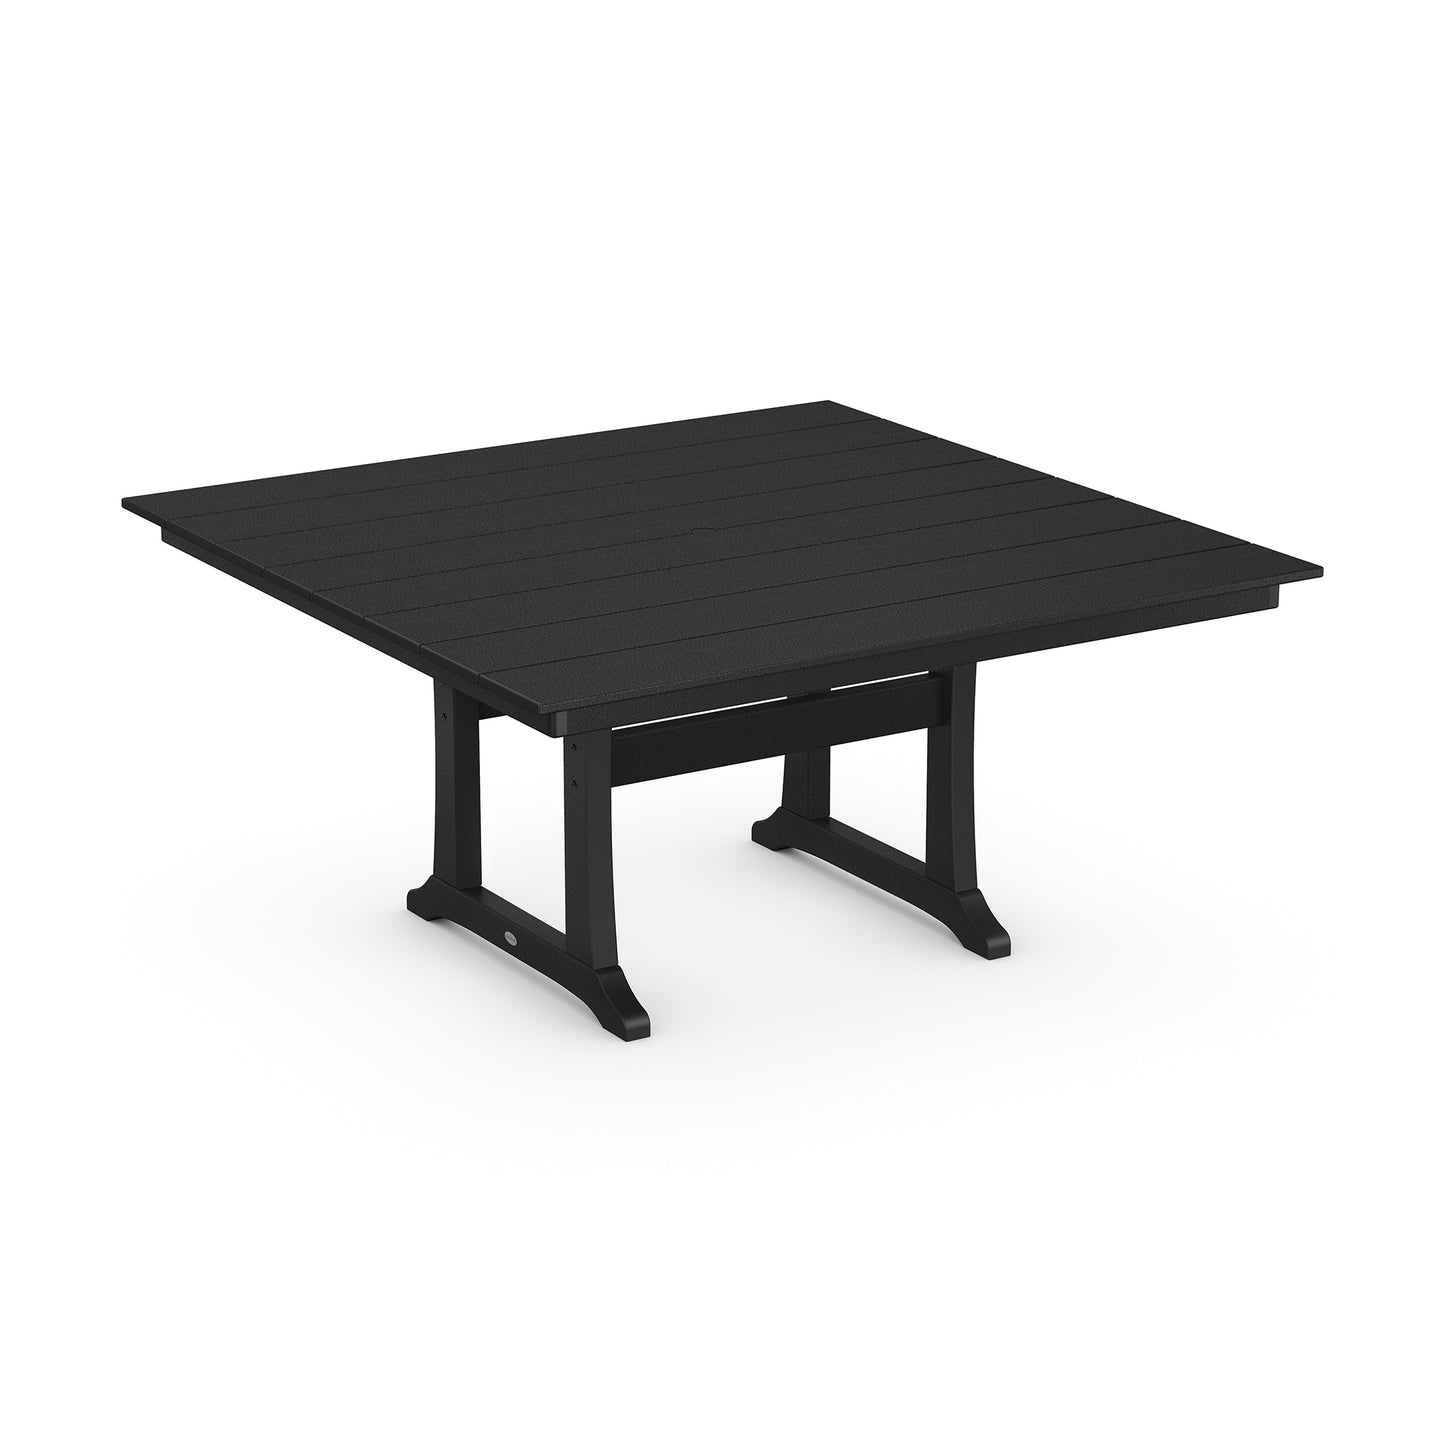 A modern black adjustable-height desk with a rectangular top and sturdy POLYWOOD Farmhouse Trestle 59" Dining Table legs, isolated on a white background.